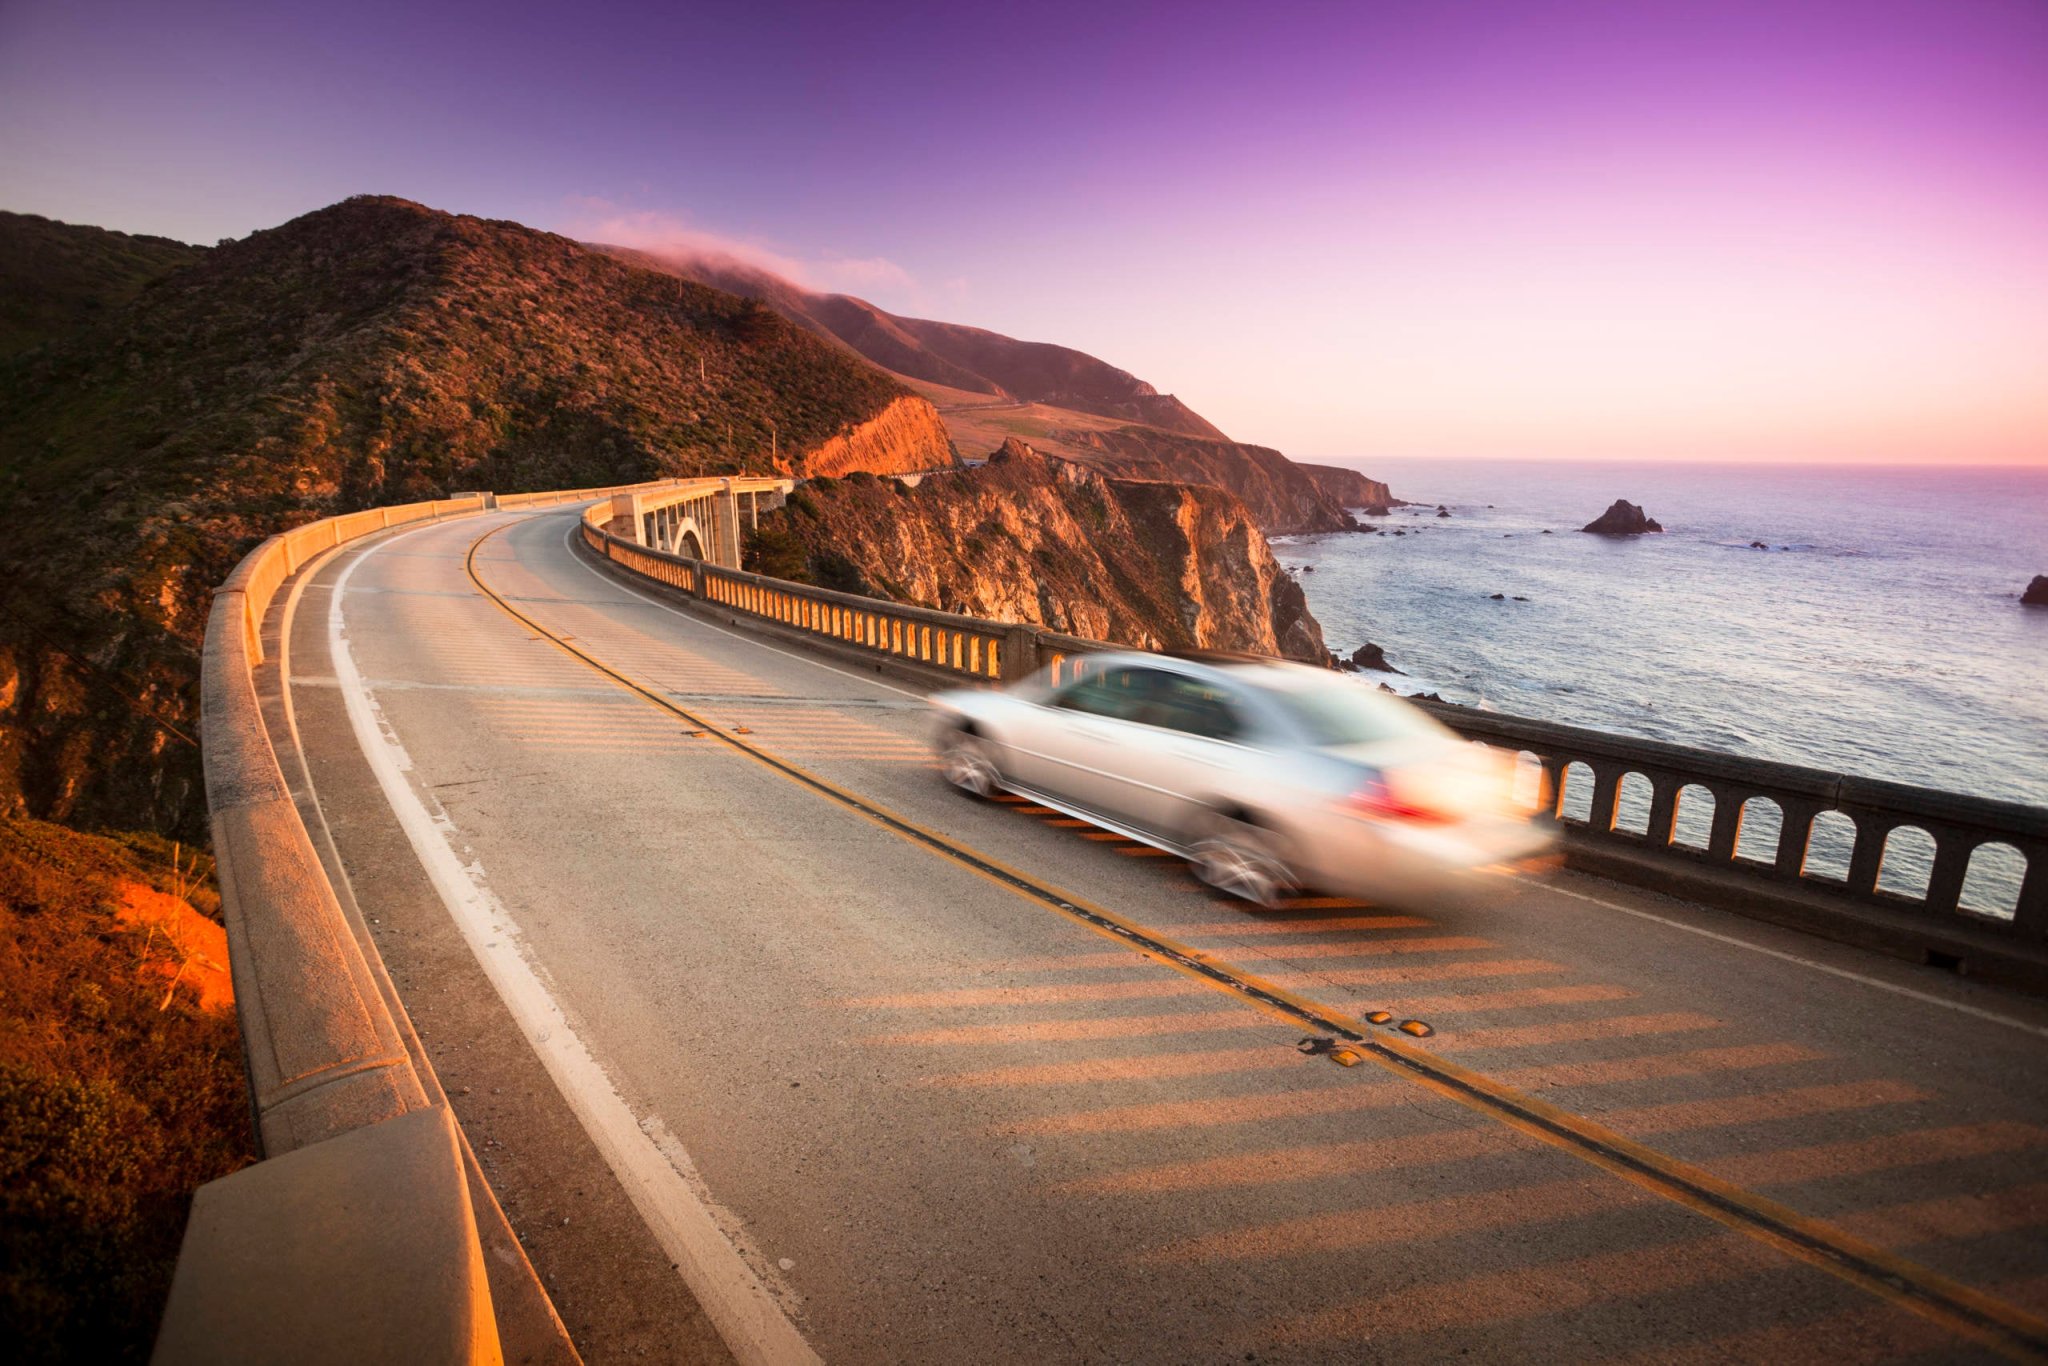 Inspired to hit the road? Here's where and what we suggest.